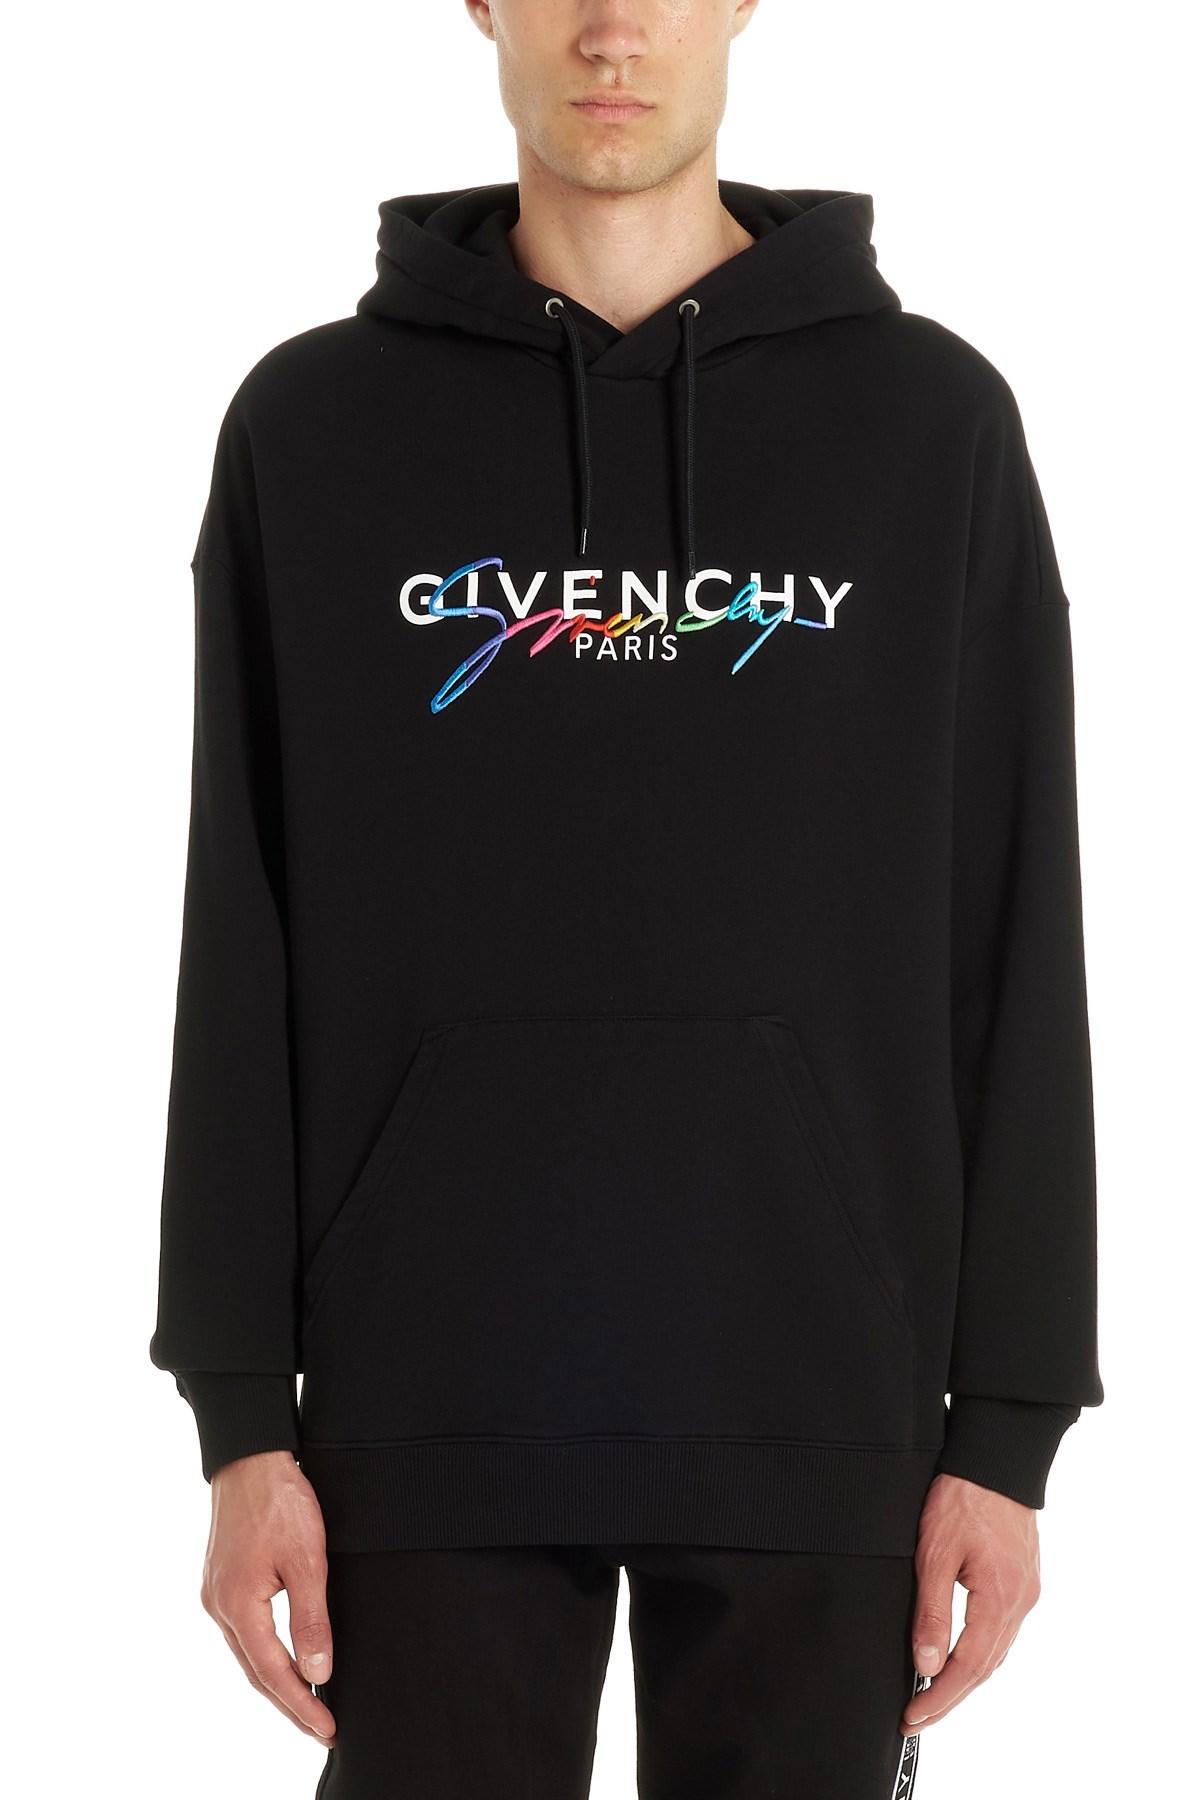 Buy > givenchy rainbow hoodie white > in stock